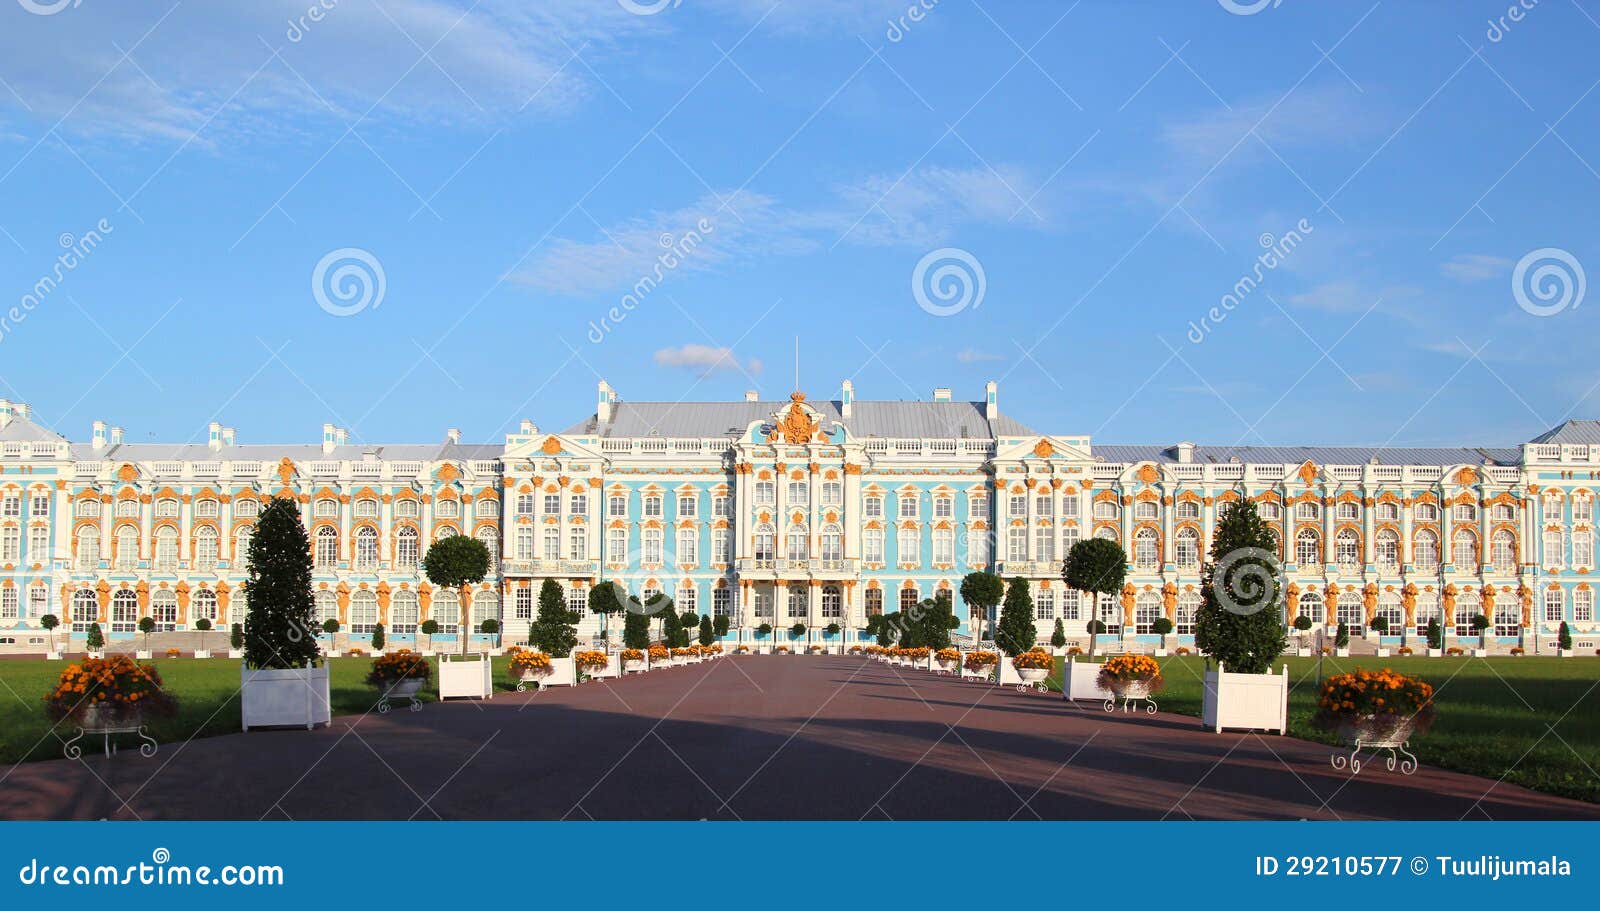 the catherine palace facade.